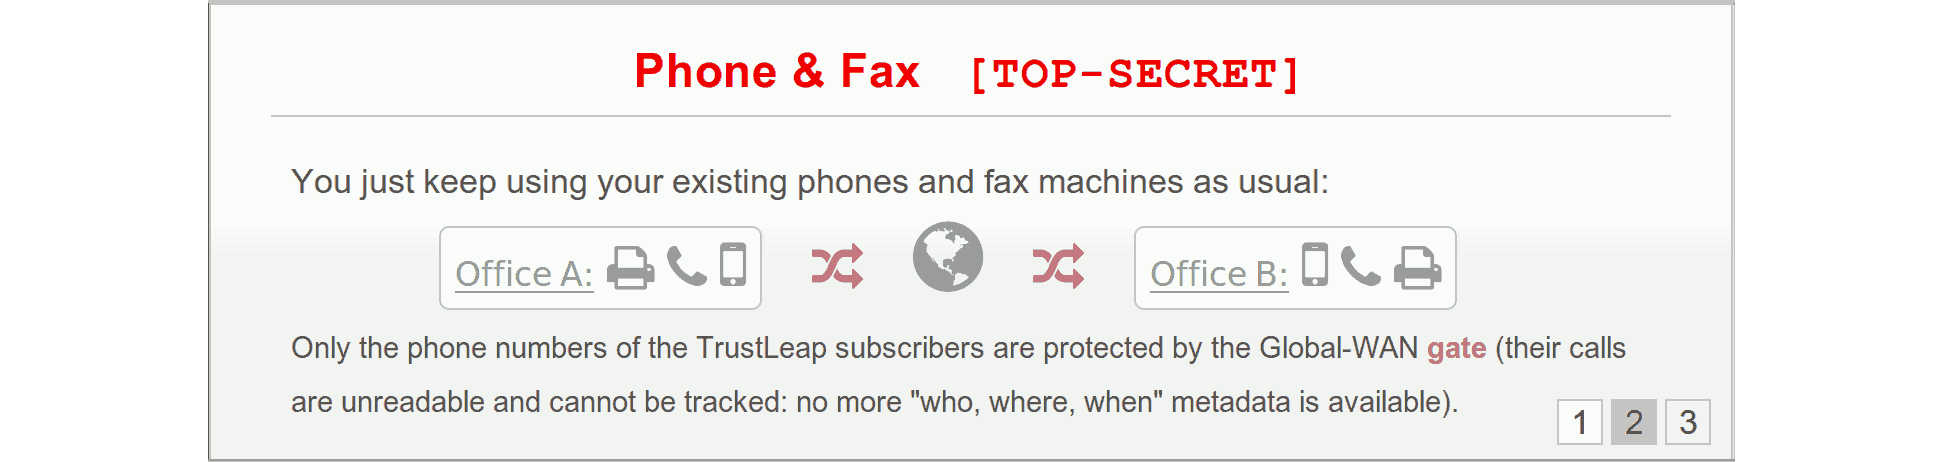 Phone and Fax [Top-Secret]